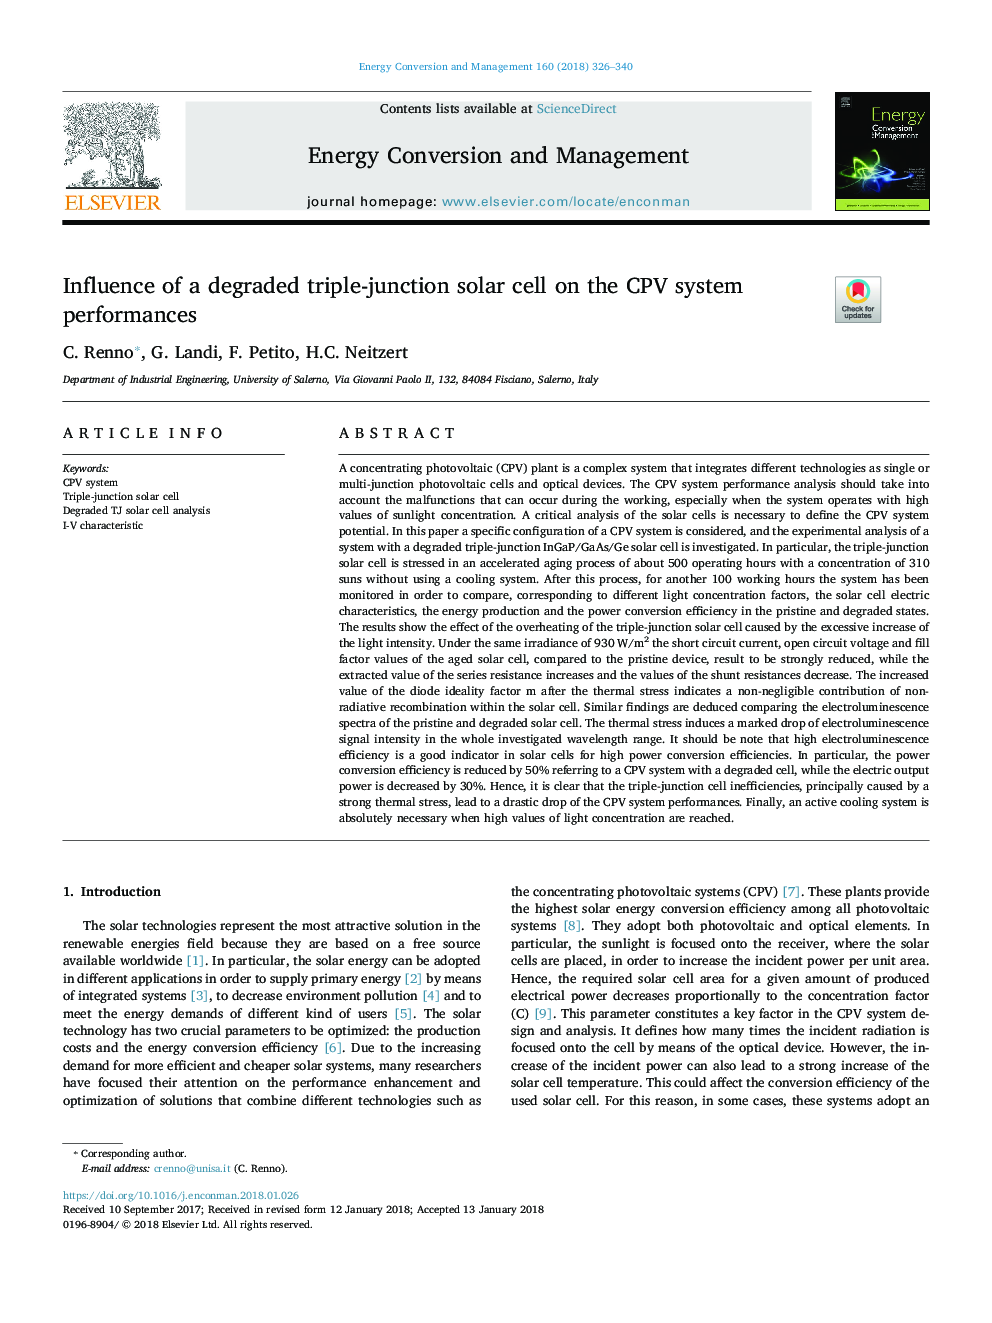 Influence of a degraded triple-junction solar cell on the CPV system performances